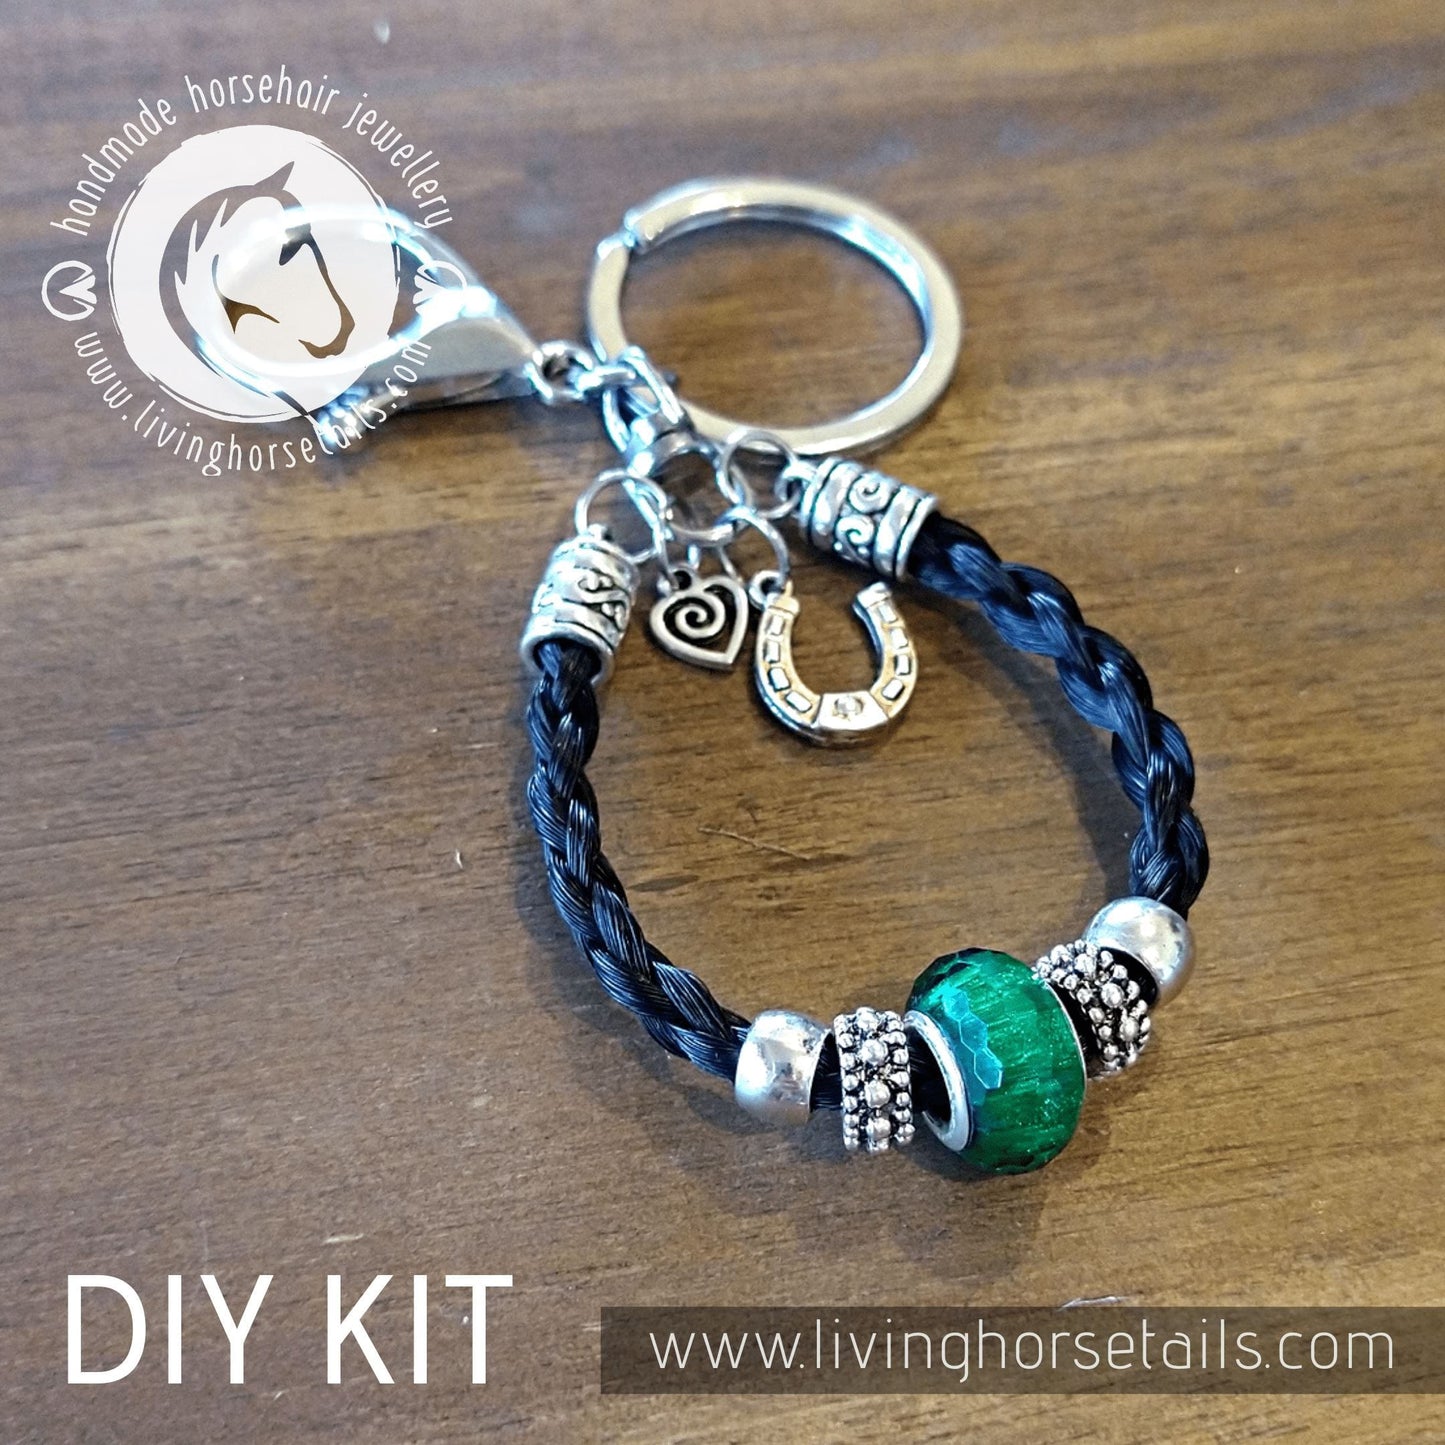 DIY KIT Keyring with acrylic glitter bead. Make your own with Horse tail hair.-Living Horse Tales Jewellery By Monika-The Equestrian